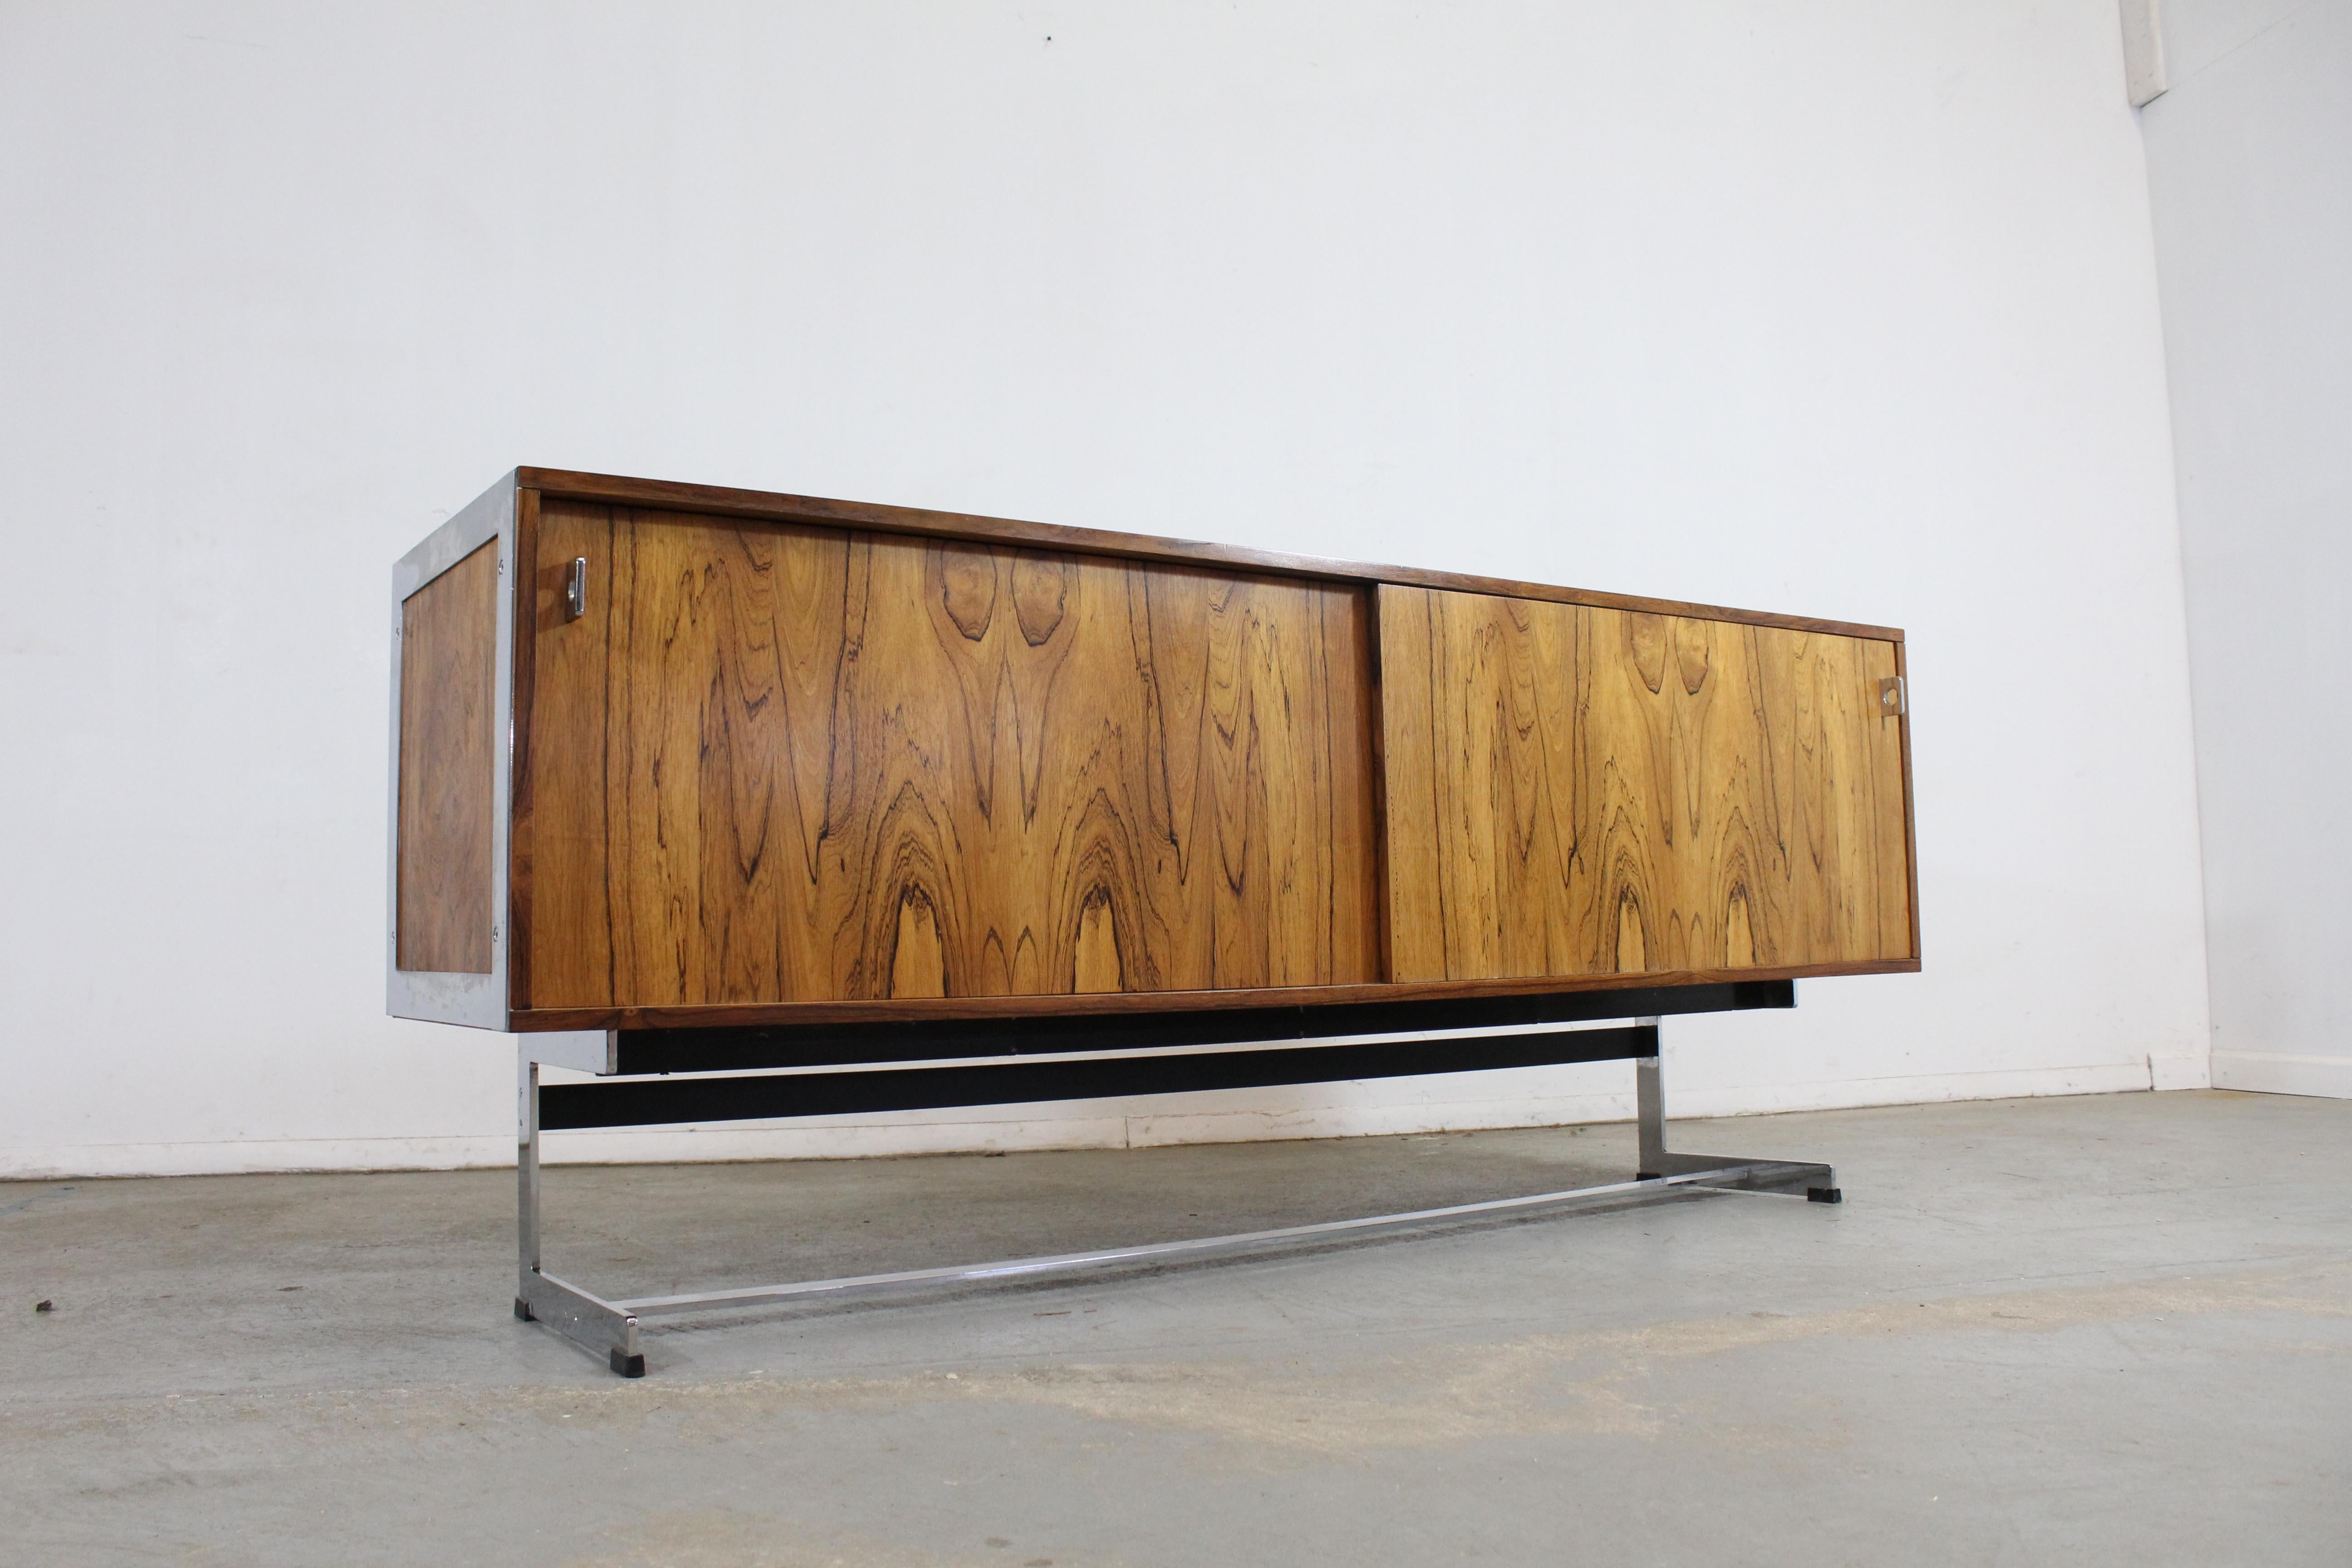 Offered is a beautiful Mid-Century Modern credenza, designed by Richard Young for Merrow Associates. It has chrome legs and pulls. Features two sliding doors with glass shelving on both sides. It is made of full grain wood. It's in very good